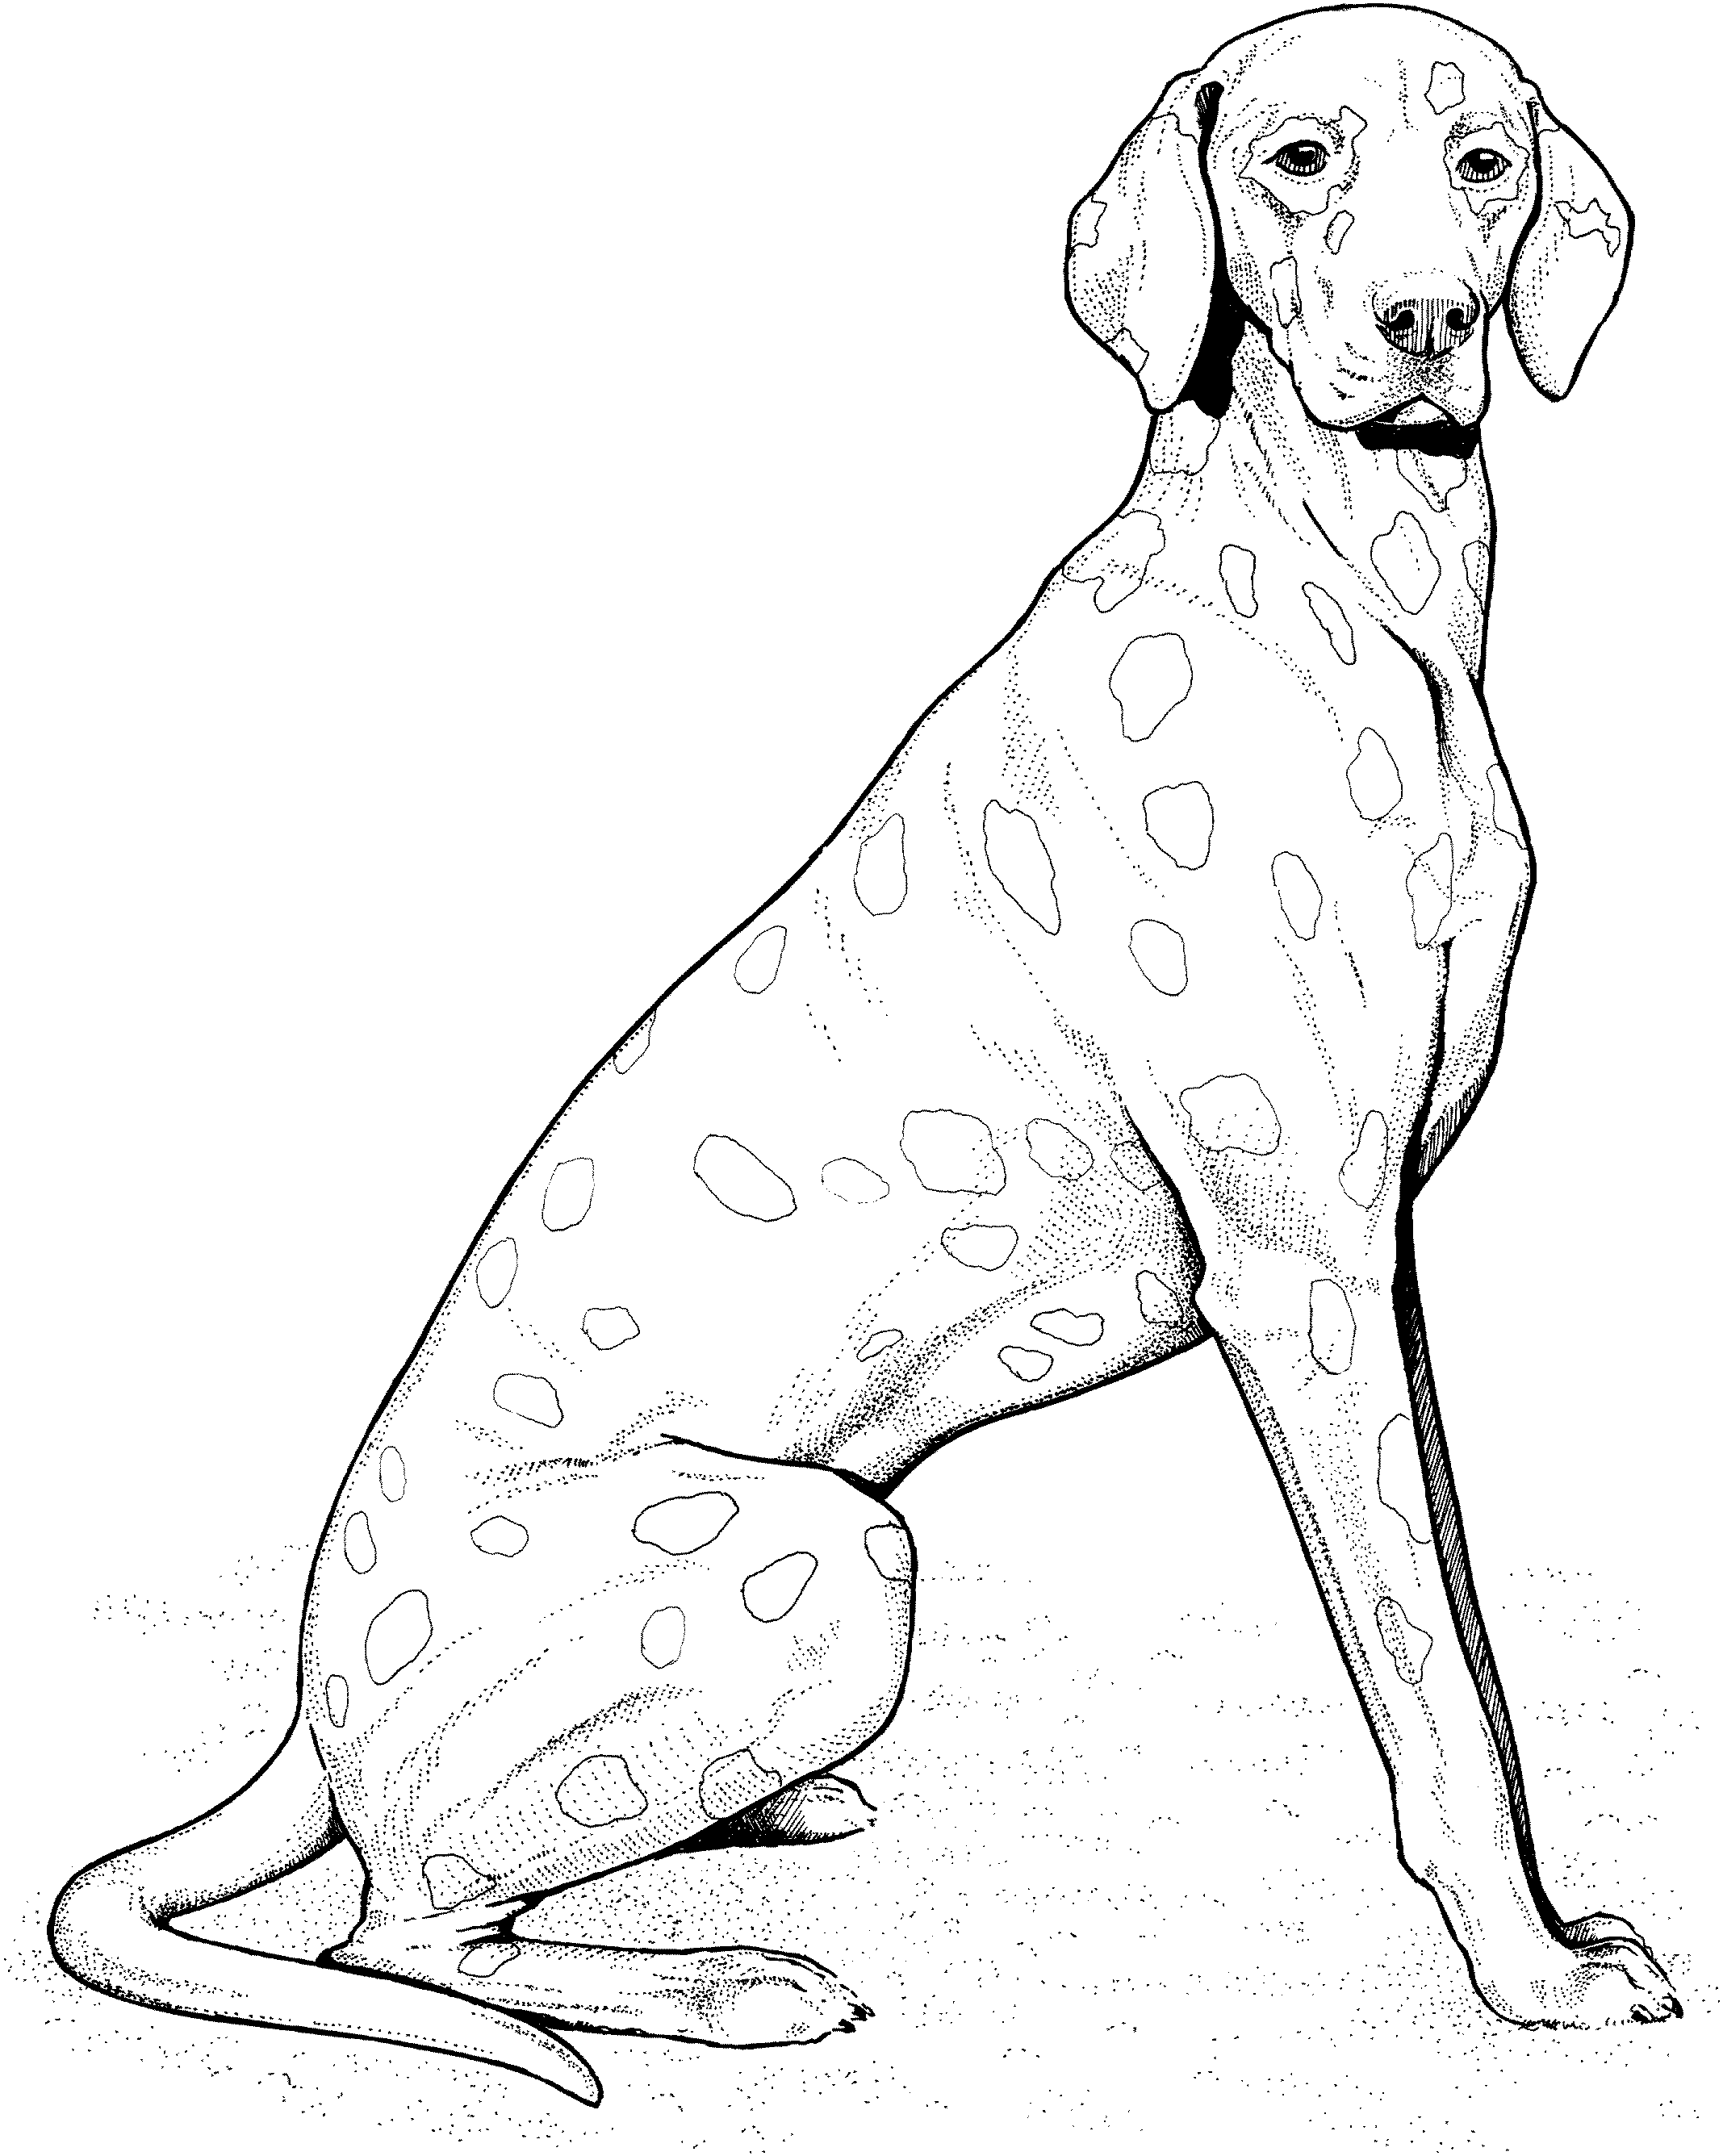 dog breeds coloring pages dogs coloring pages for kids coloringfile pages dog breeds coloring 